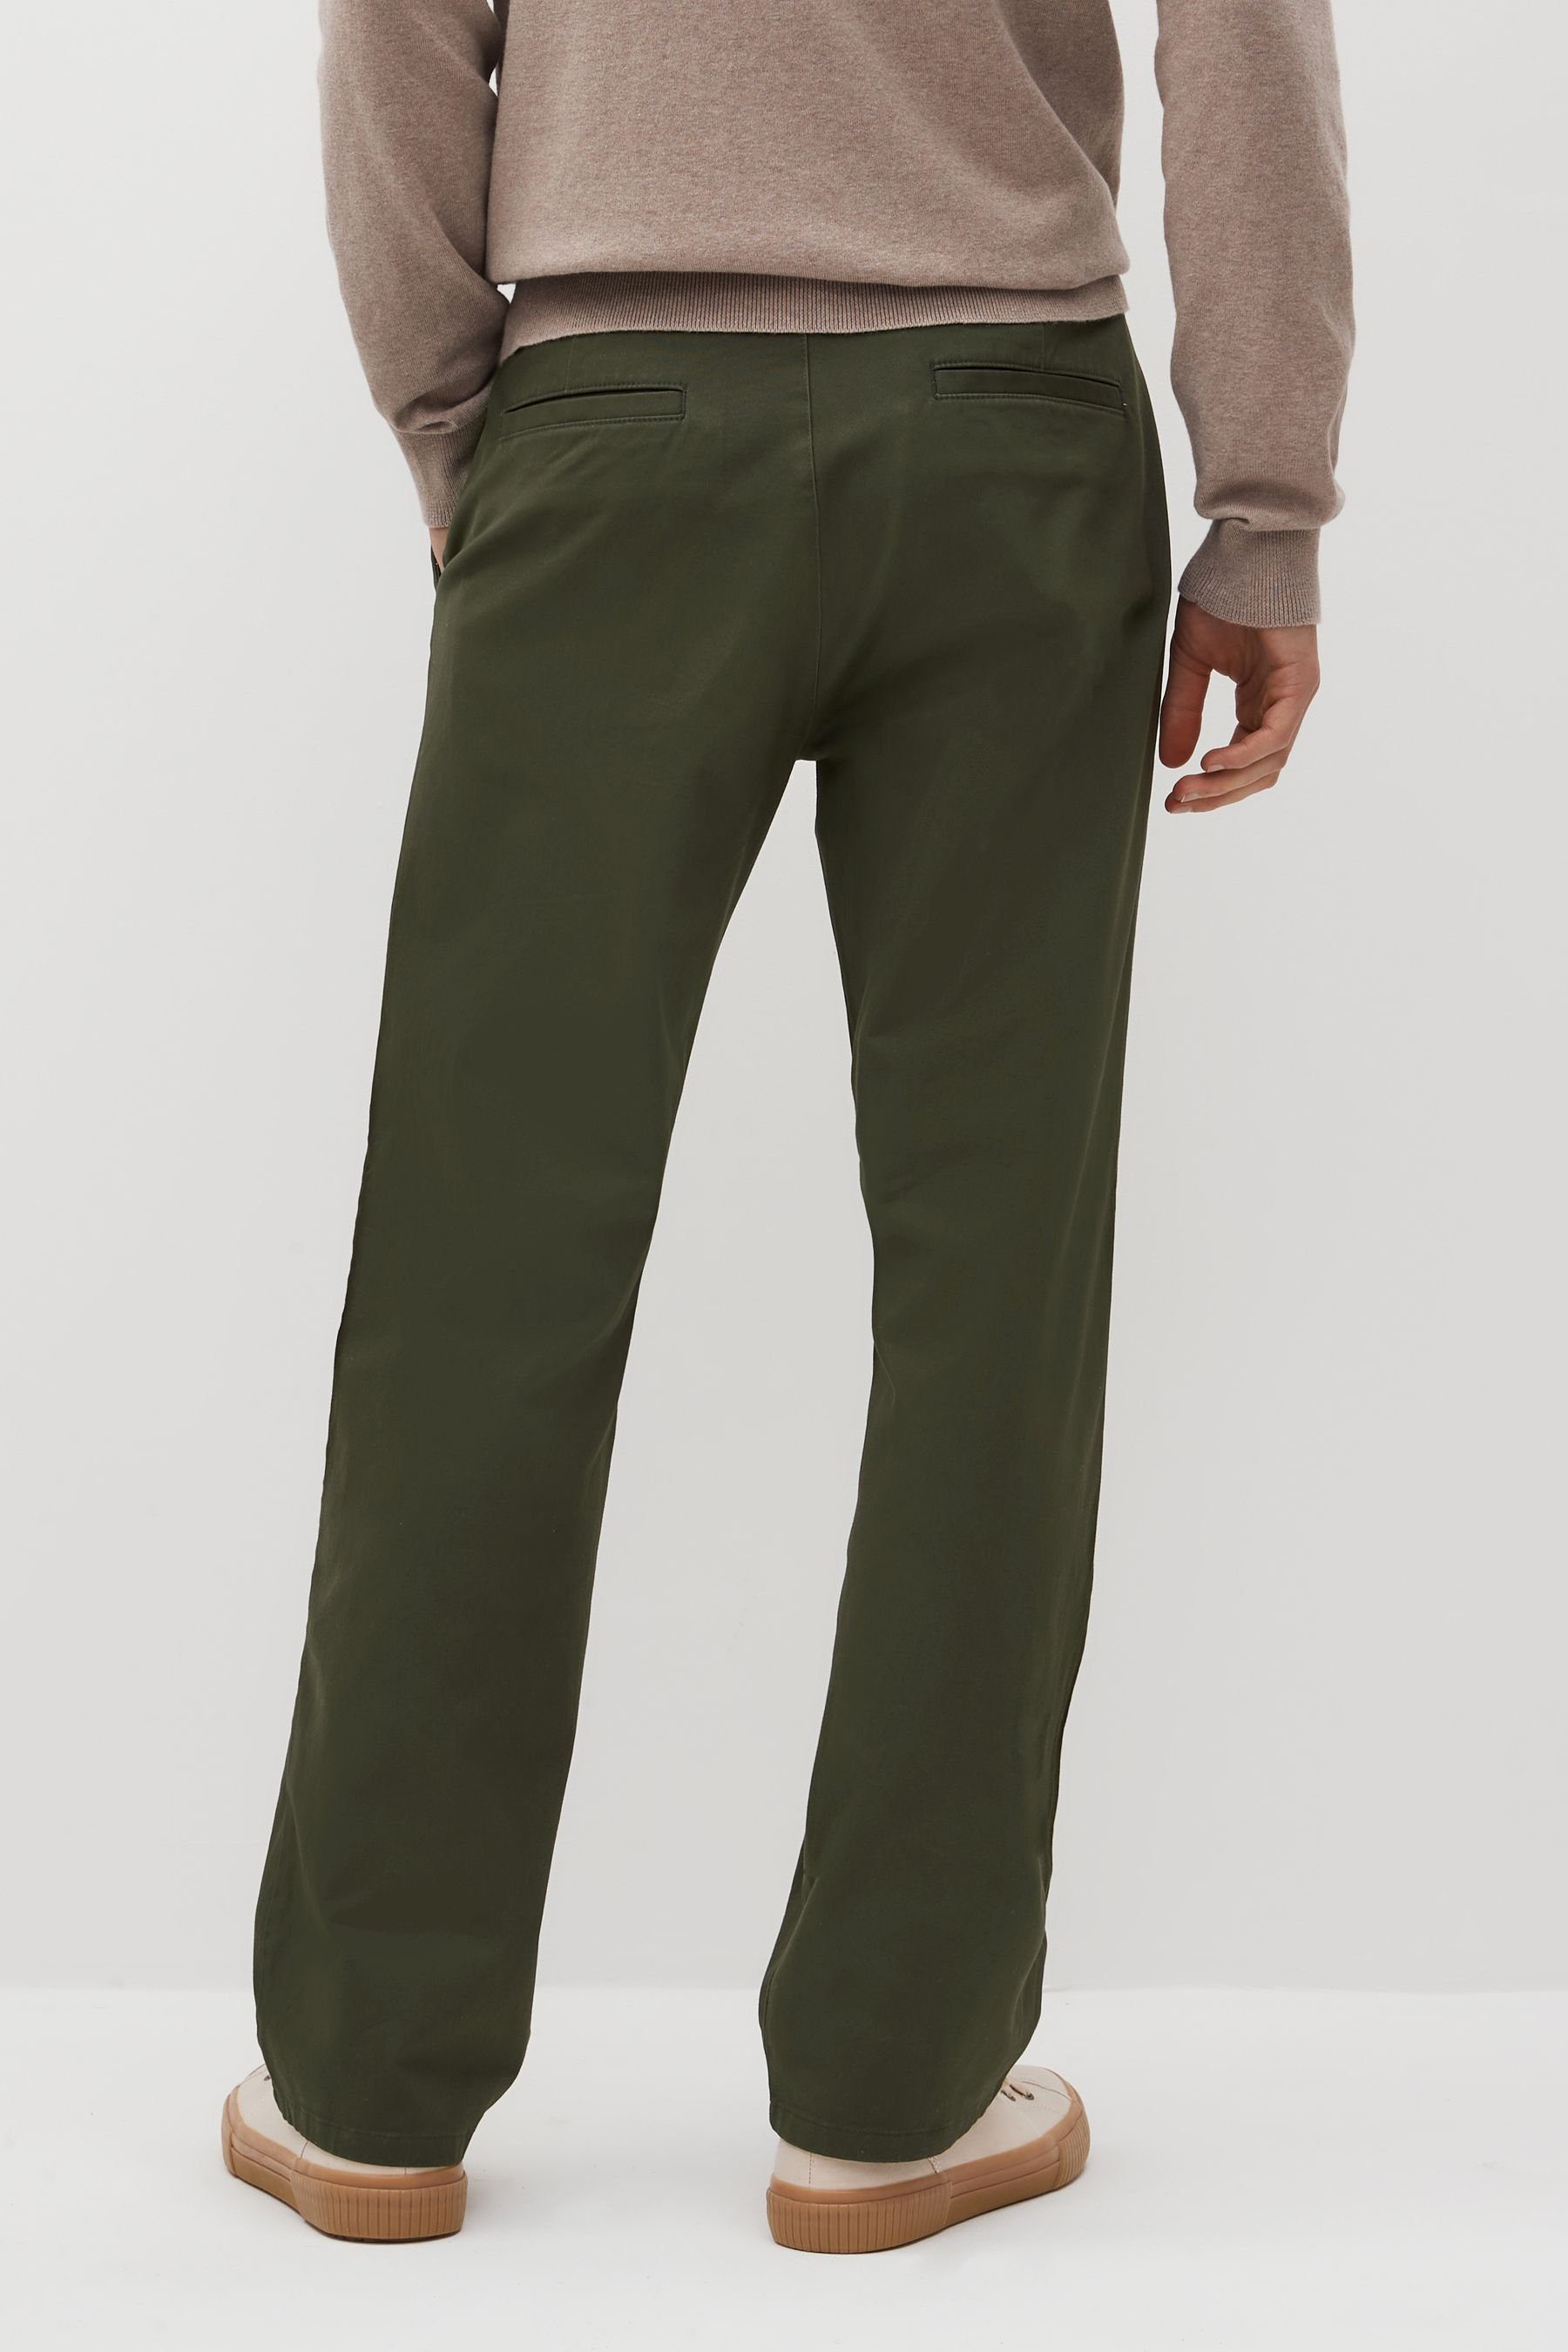 Green (1-tlg) im Relaxed Next Fit Chinohose Stretch-Chinohose Khaki